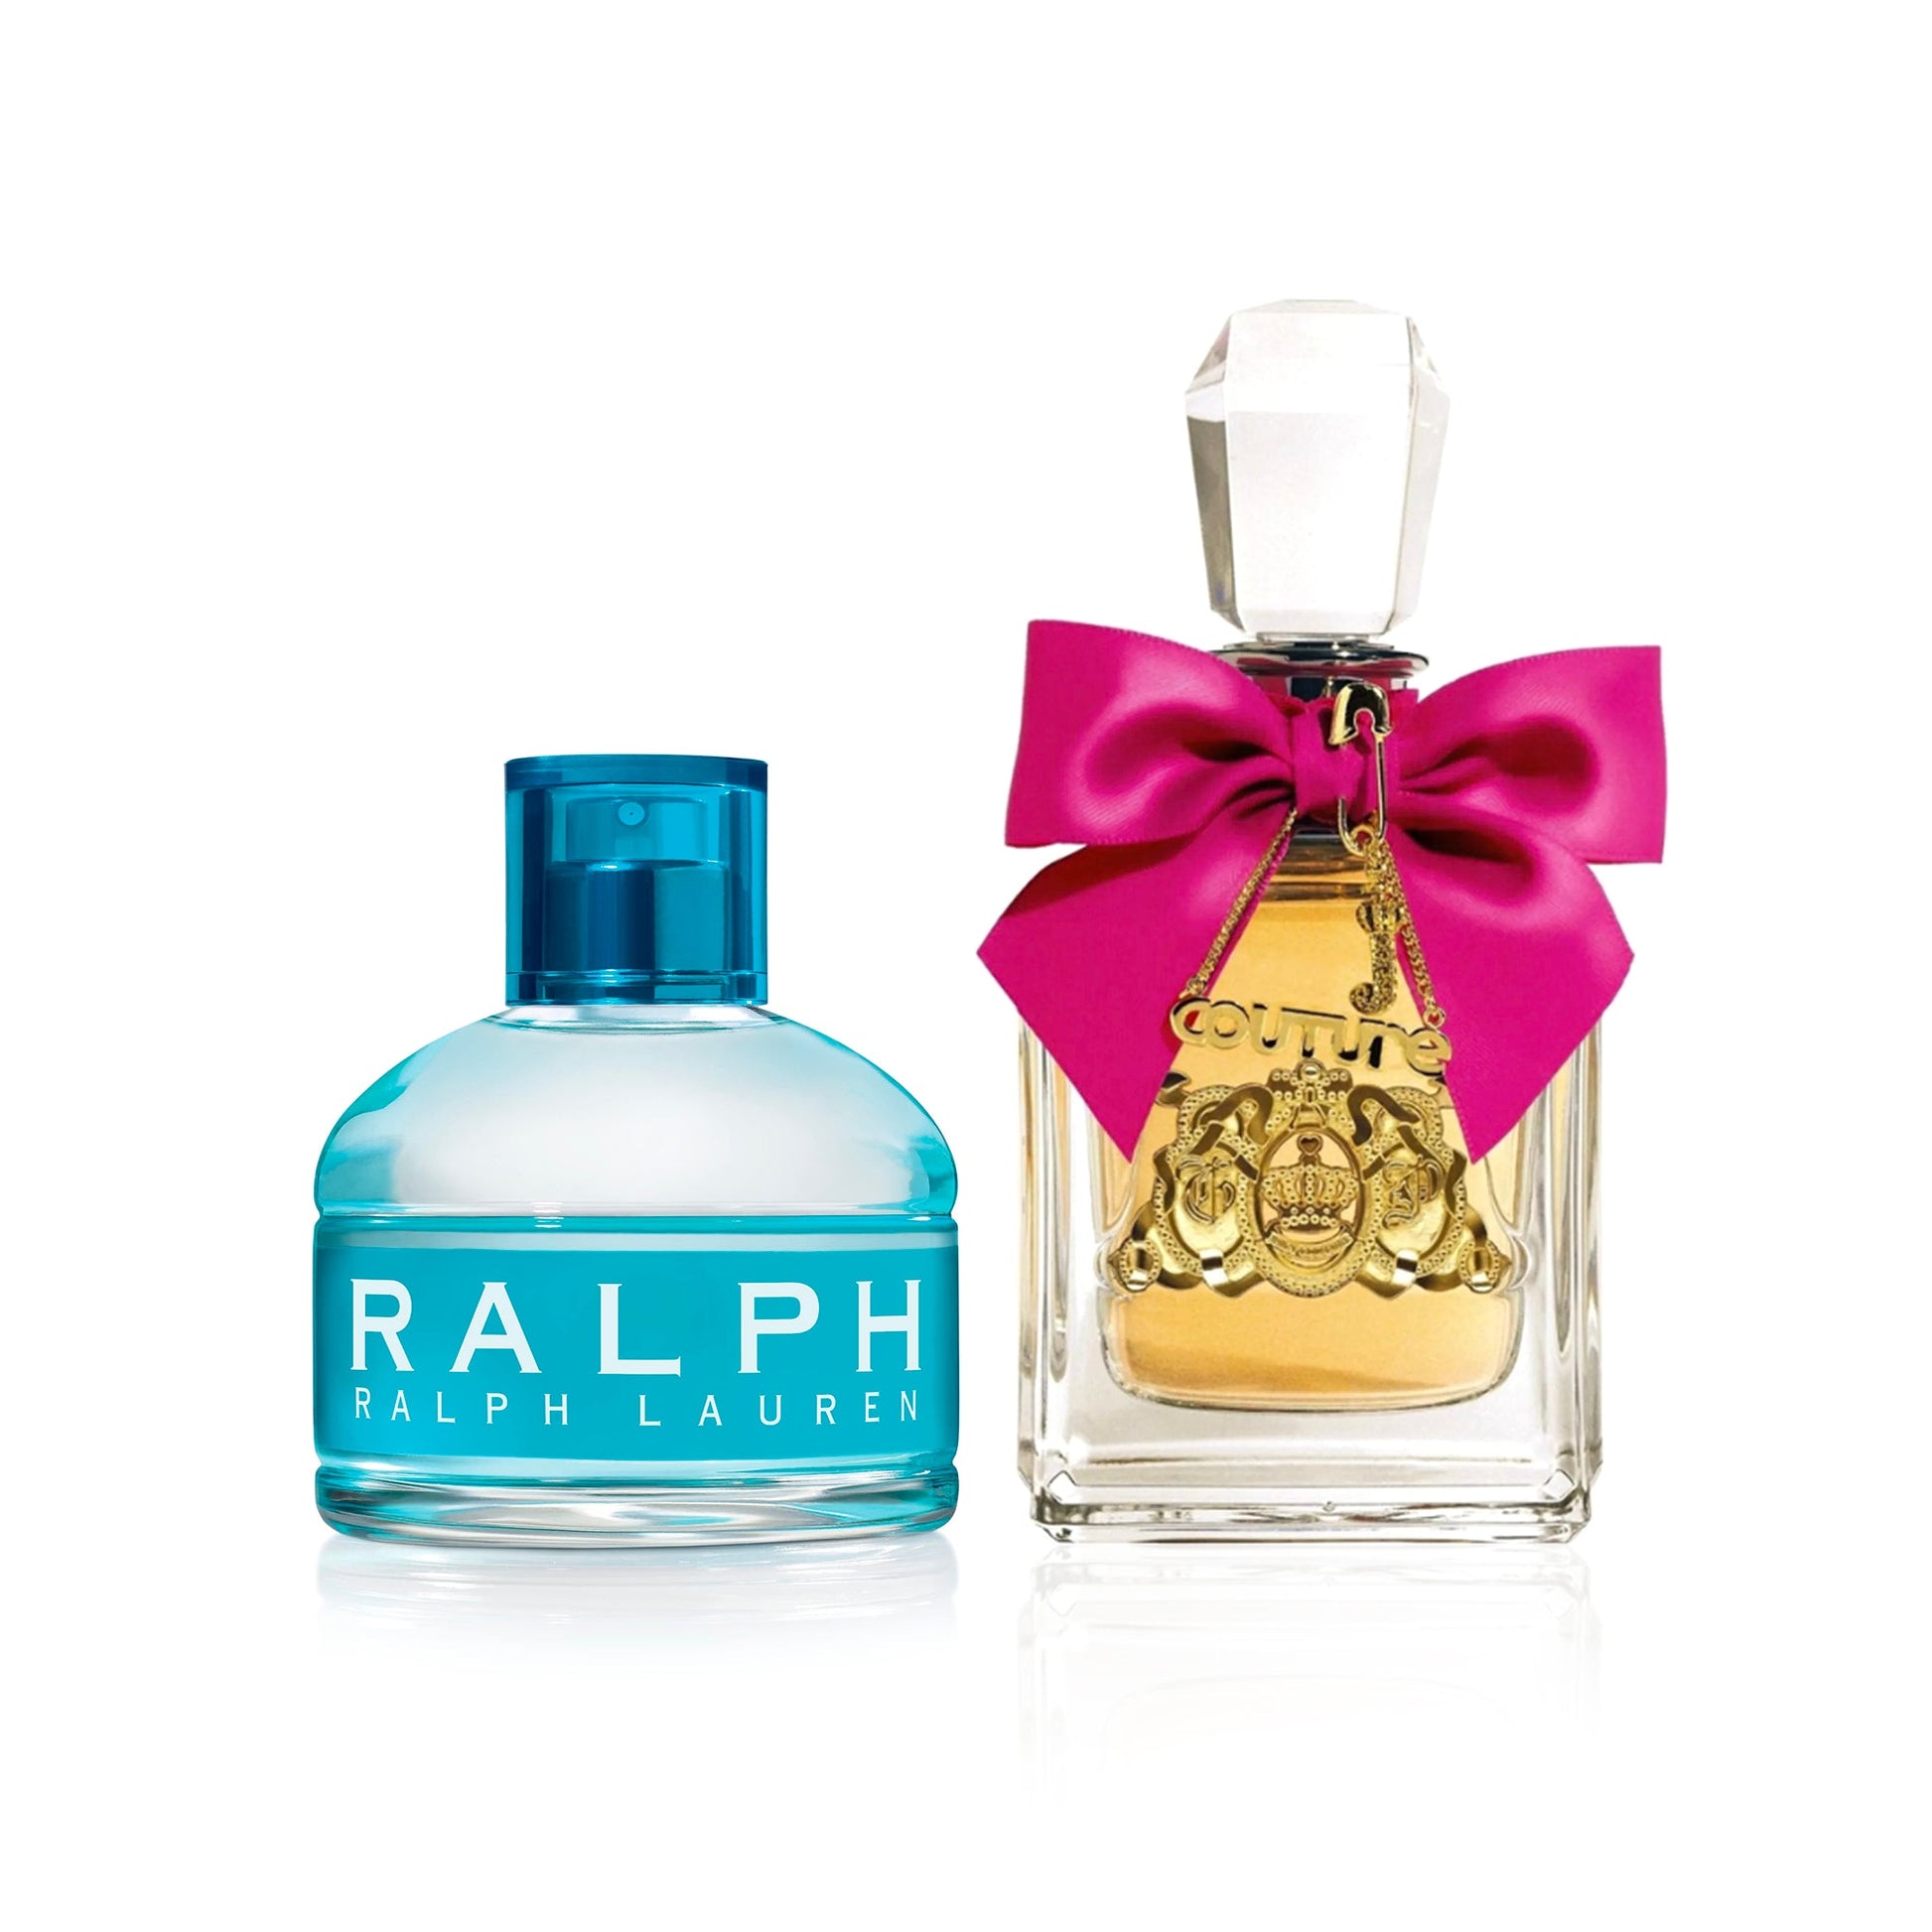 Bundle for Women: Ralph by Ralph Lauren and Viva La Juicy by Juicy Couture, Product image 1